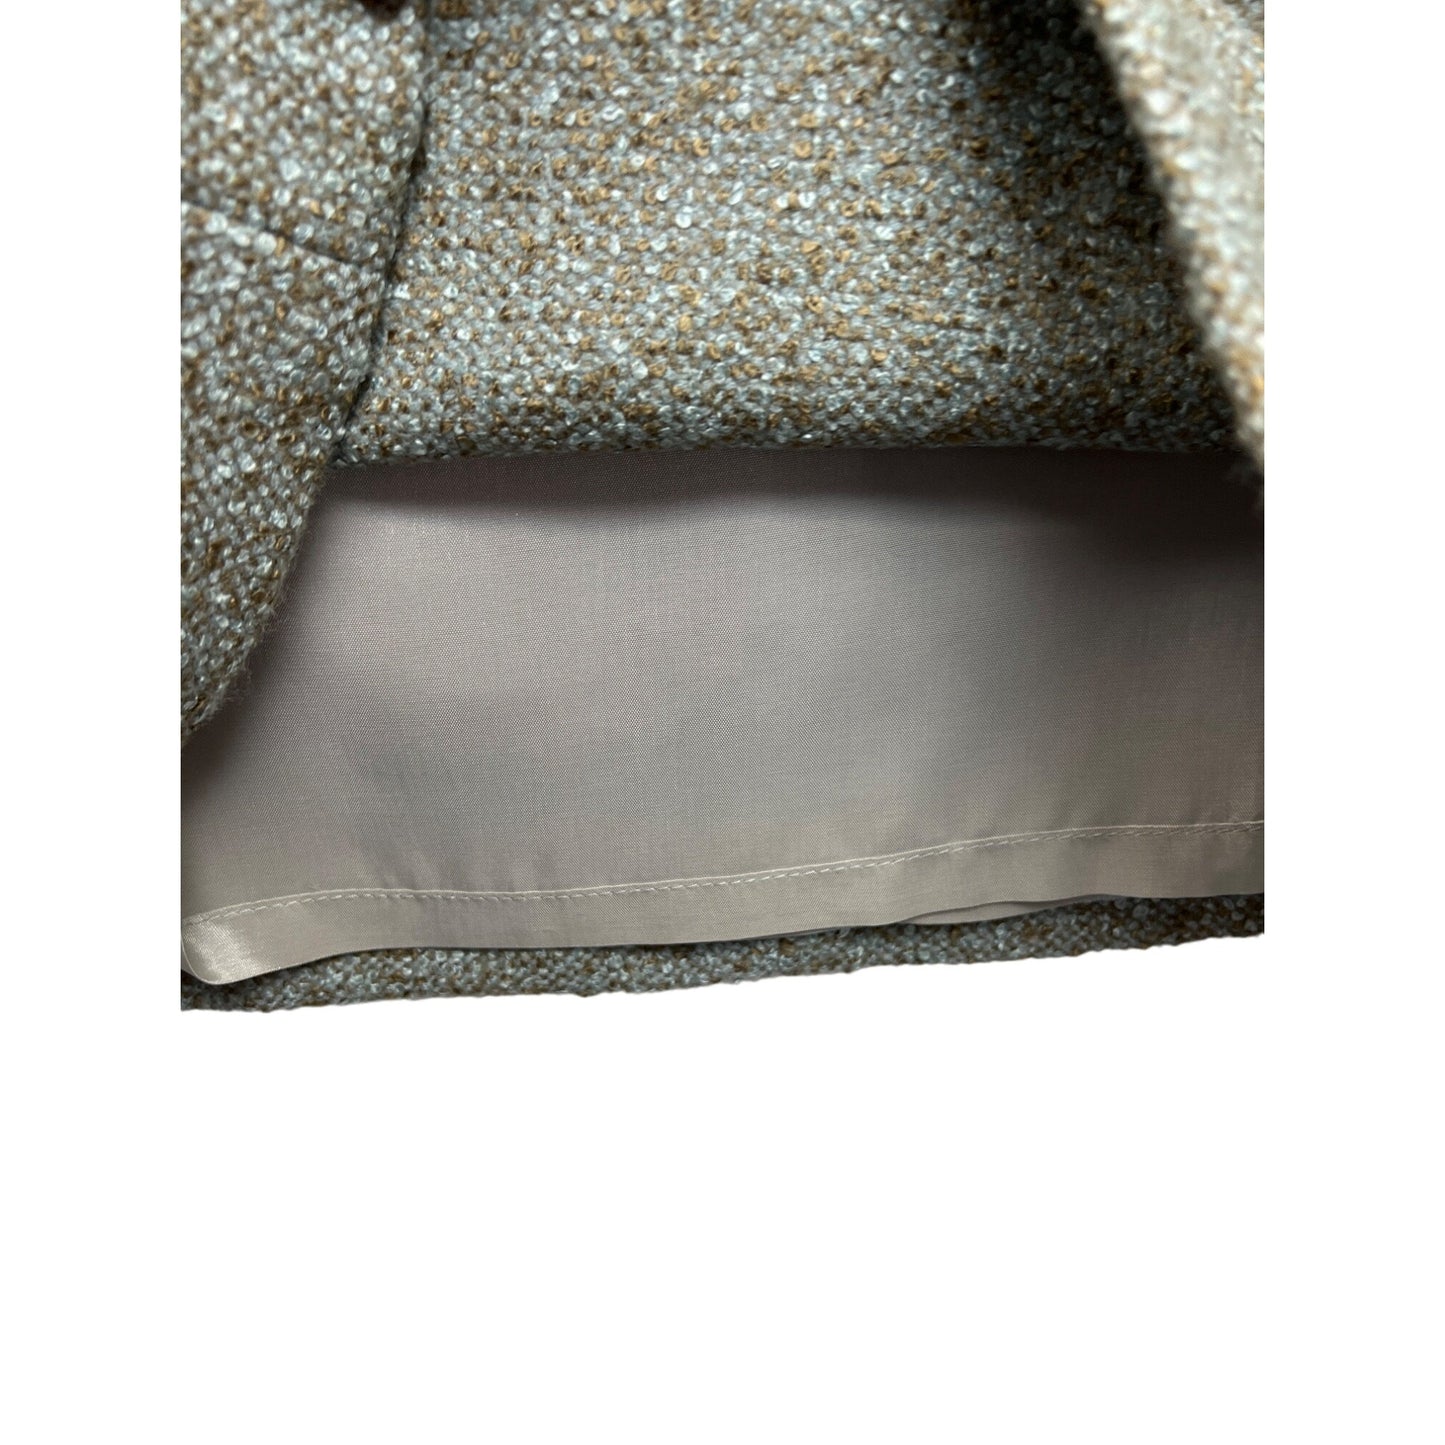 Liz Claiborne Collection NWT Light Green and Light Brown Wool Tweed Skirt Suit Set